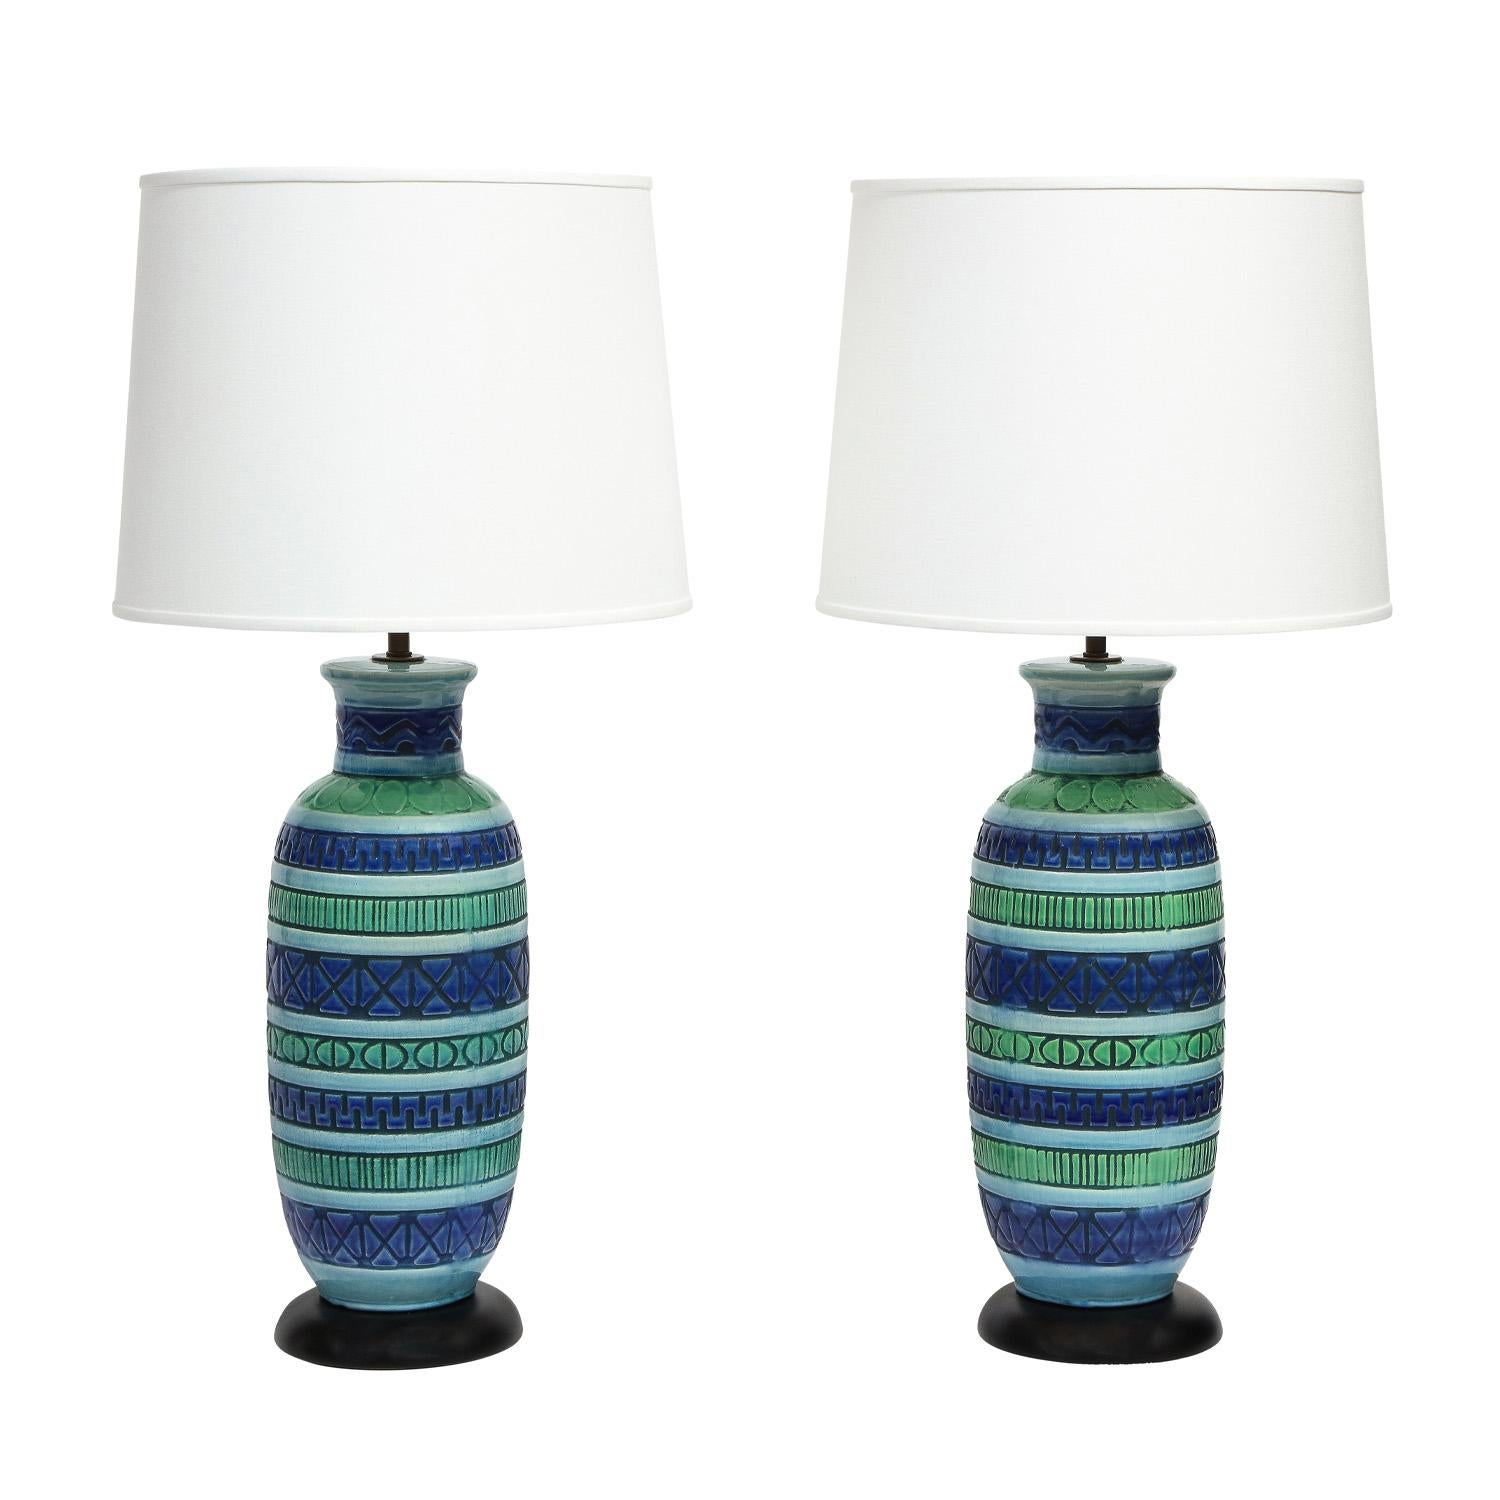 Pair of large hand-thrown ceramic table lamps, hand-painted and glazed in blue and green, on dark wood bases with bronze hardware, Italian 1950's. Newly rewired with bronze hardware and silk cords. Bases refinished. In like-new